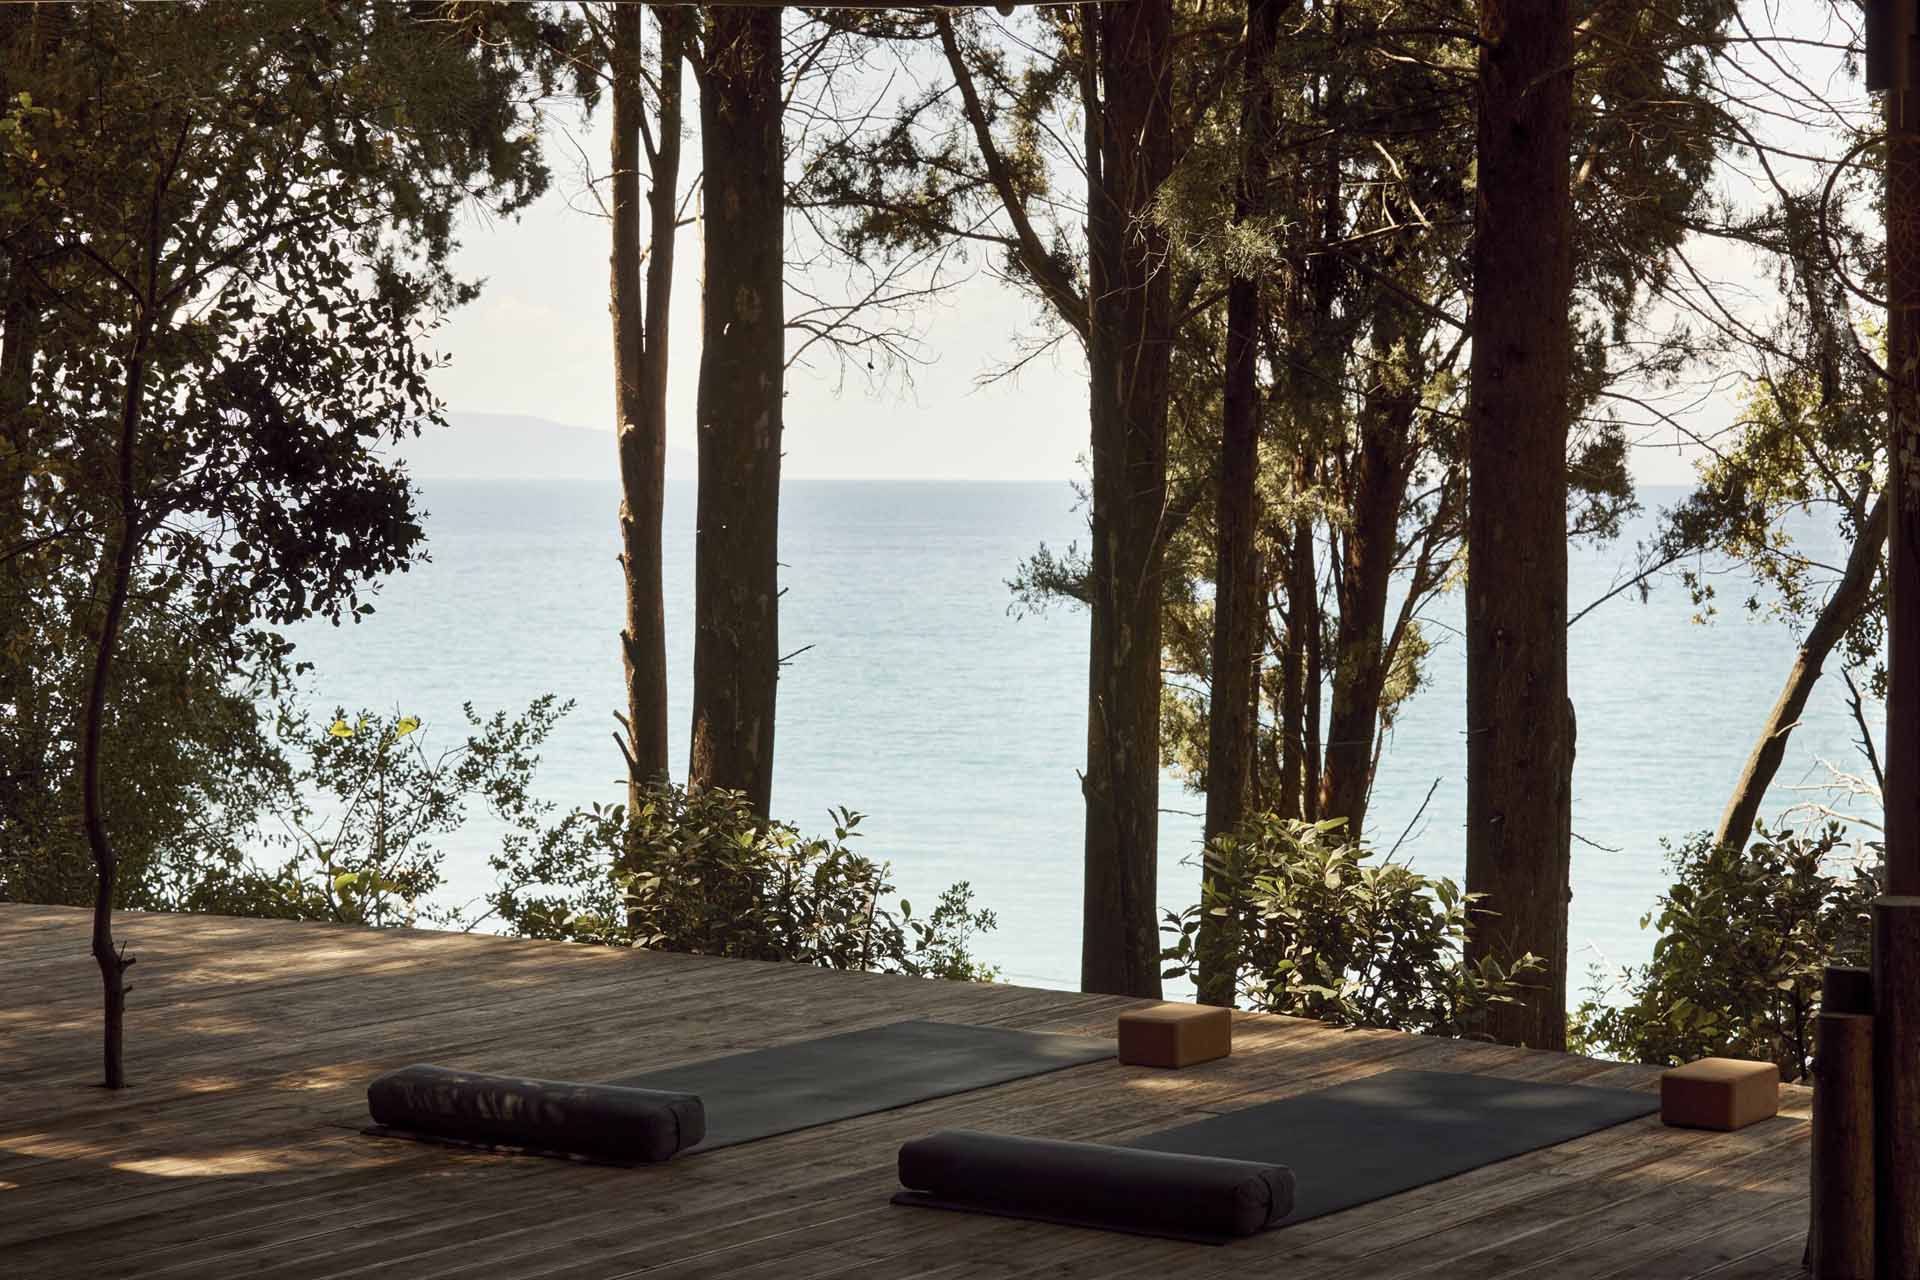 yoga mattresses with sea view